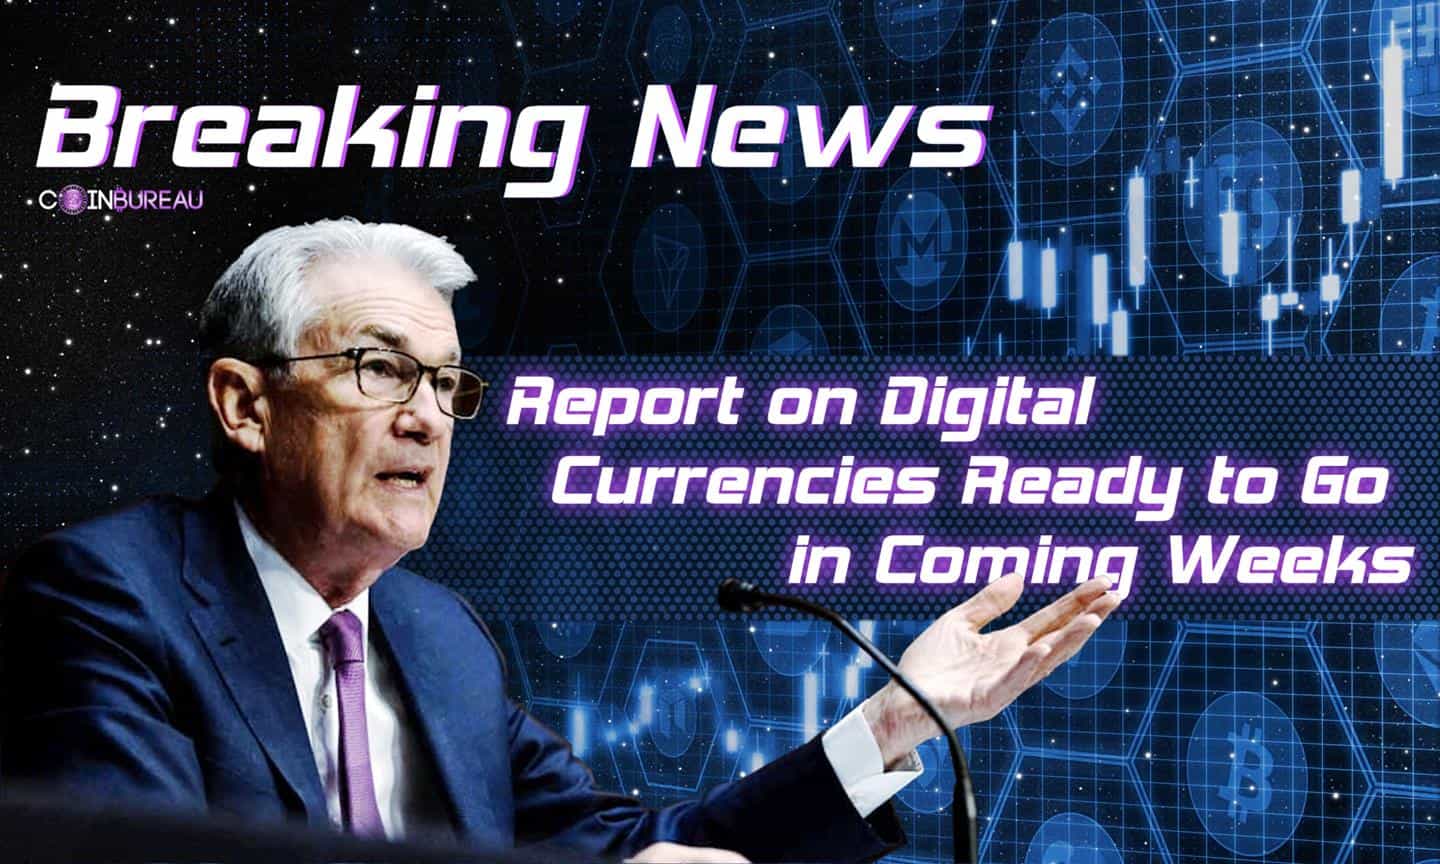 Fed Chair Jerome Powell Says Report on Digital Currencies Ready to Go in Coming Weeks